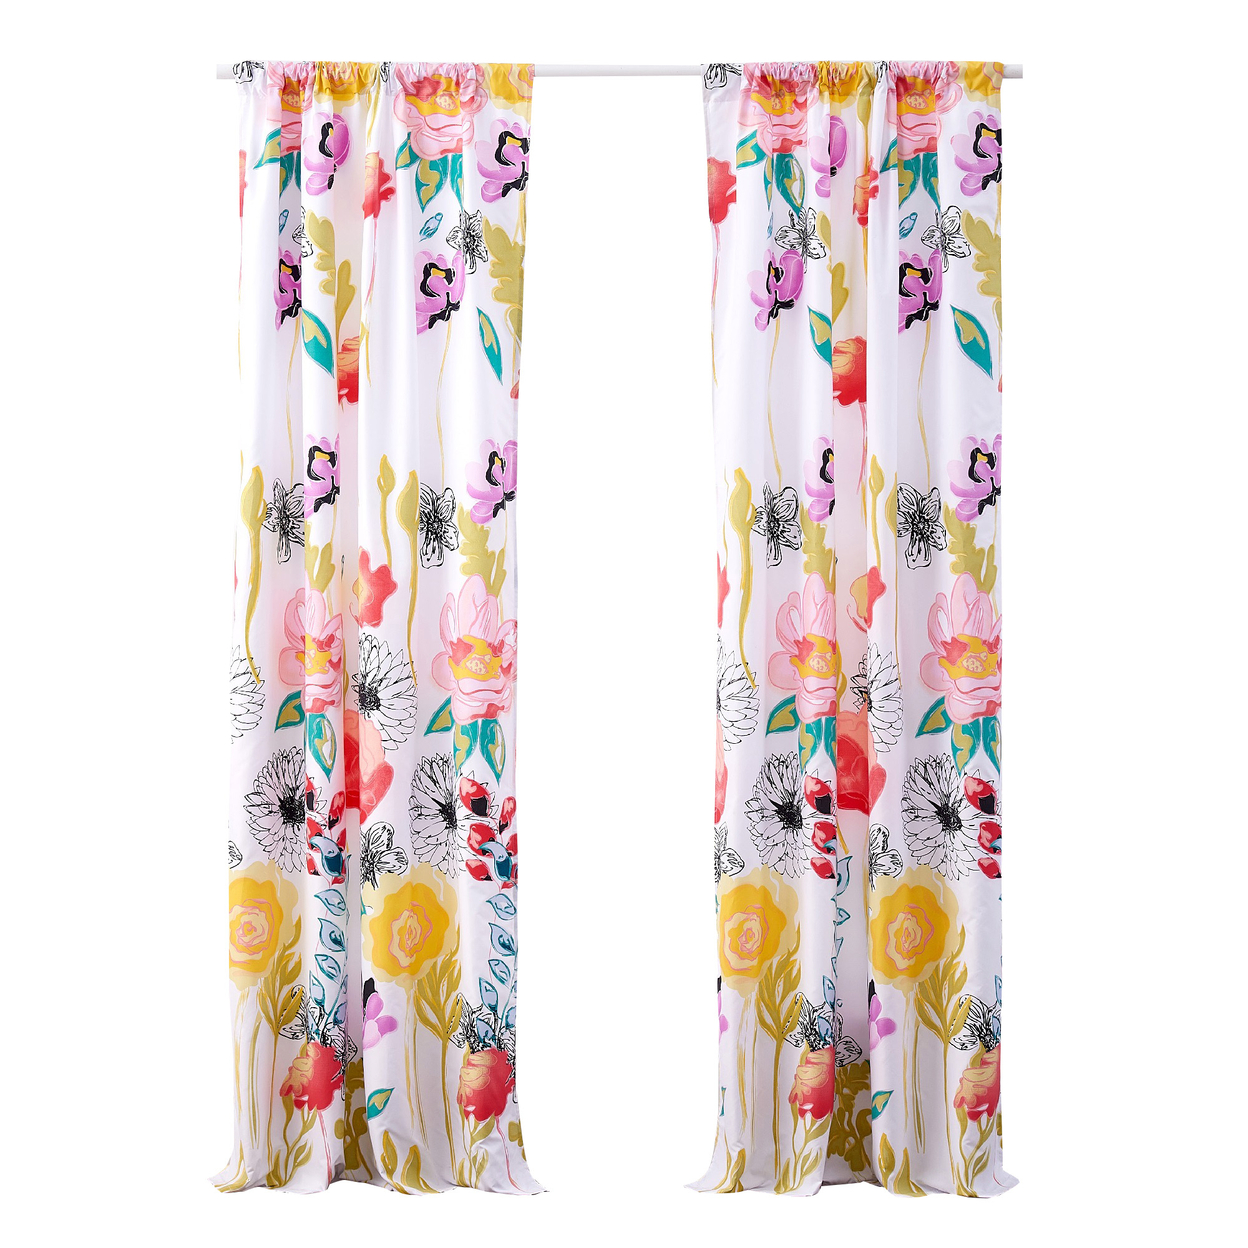 Minsk 84 Inch Window Panel Curtains, Bright Flower Patterns, Vibrant Colors